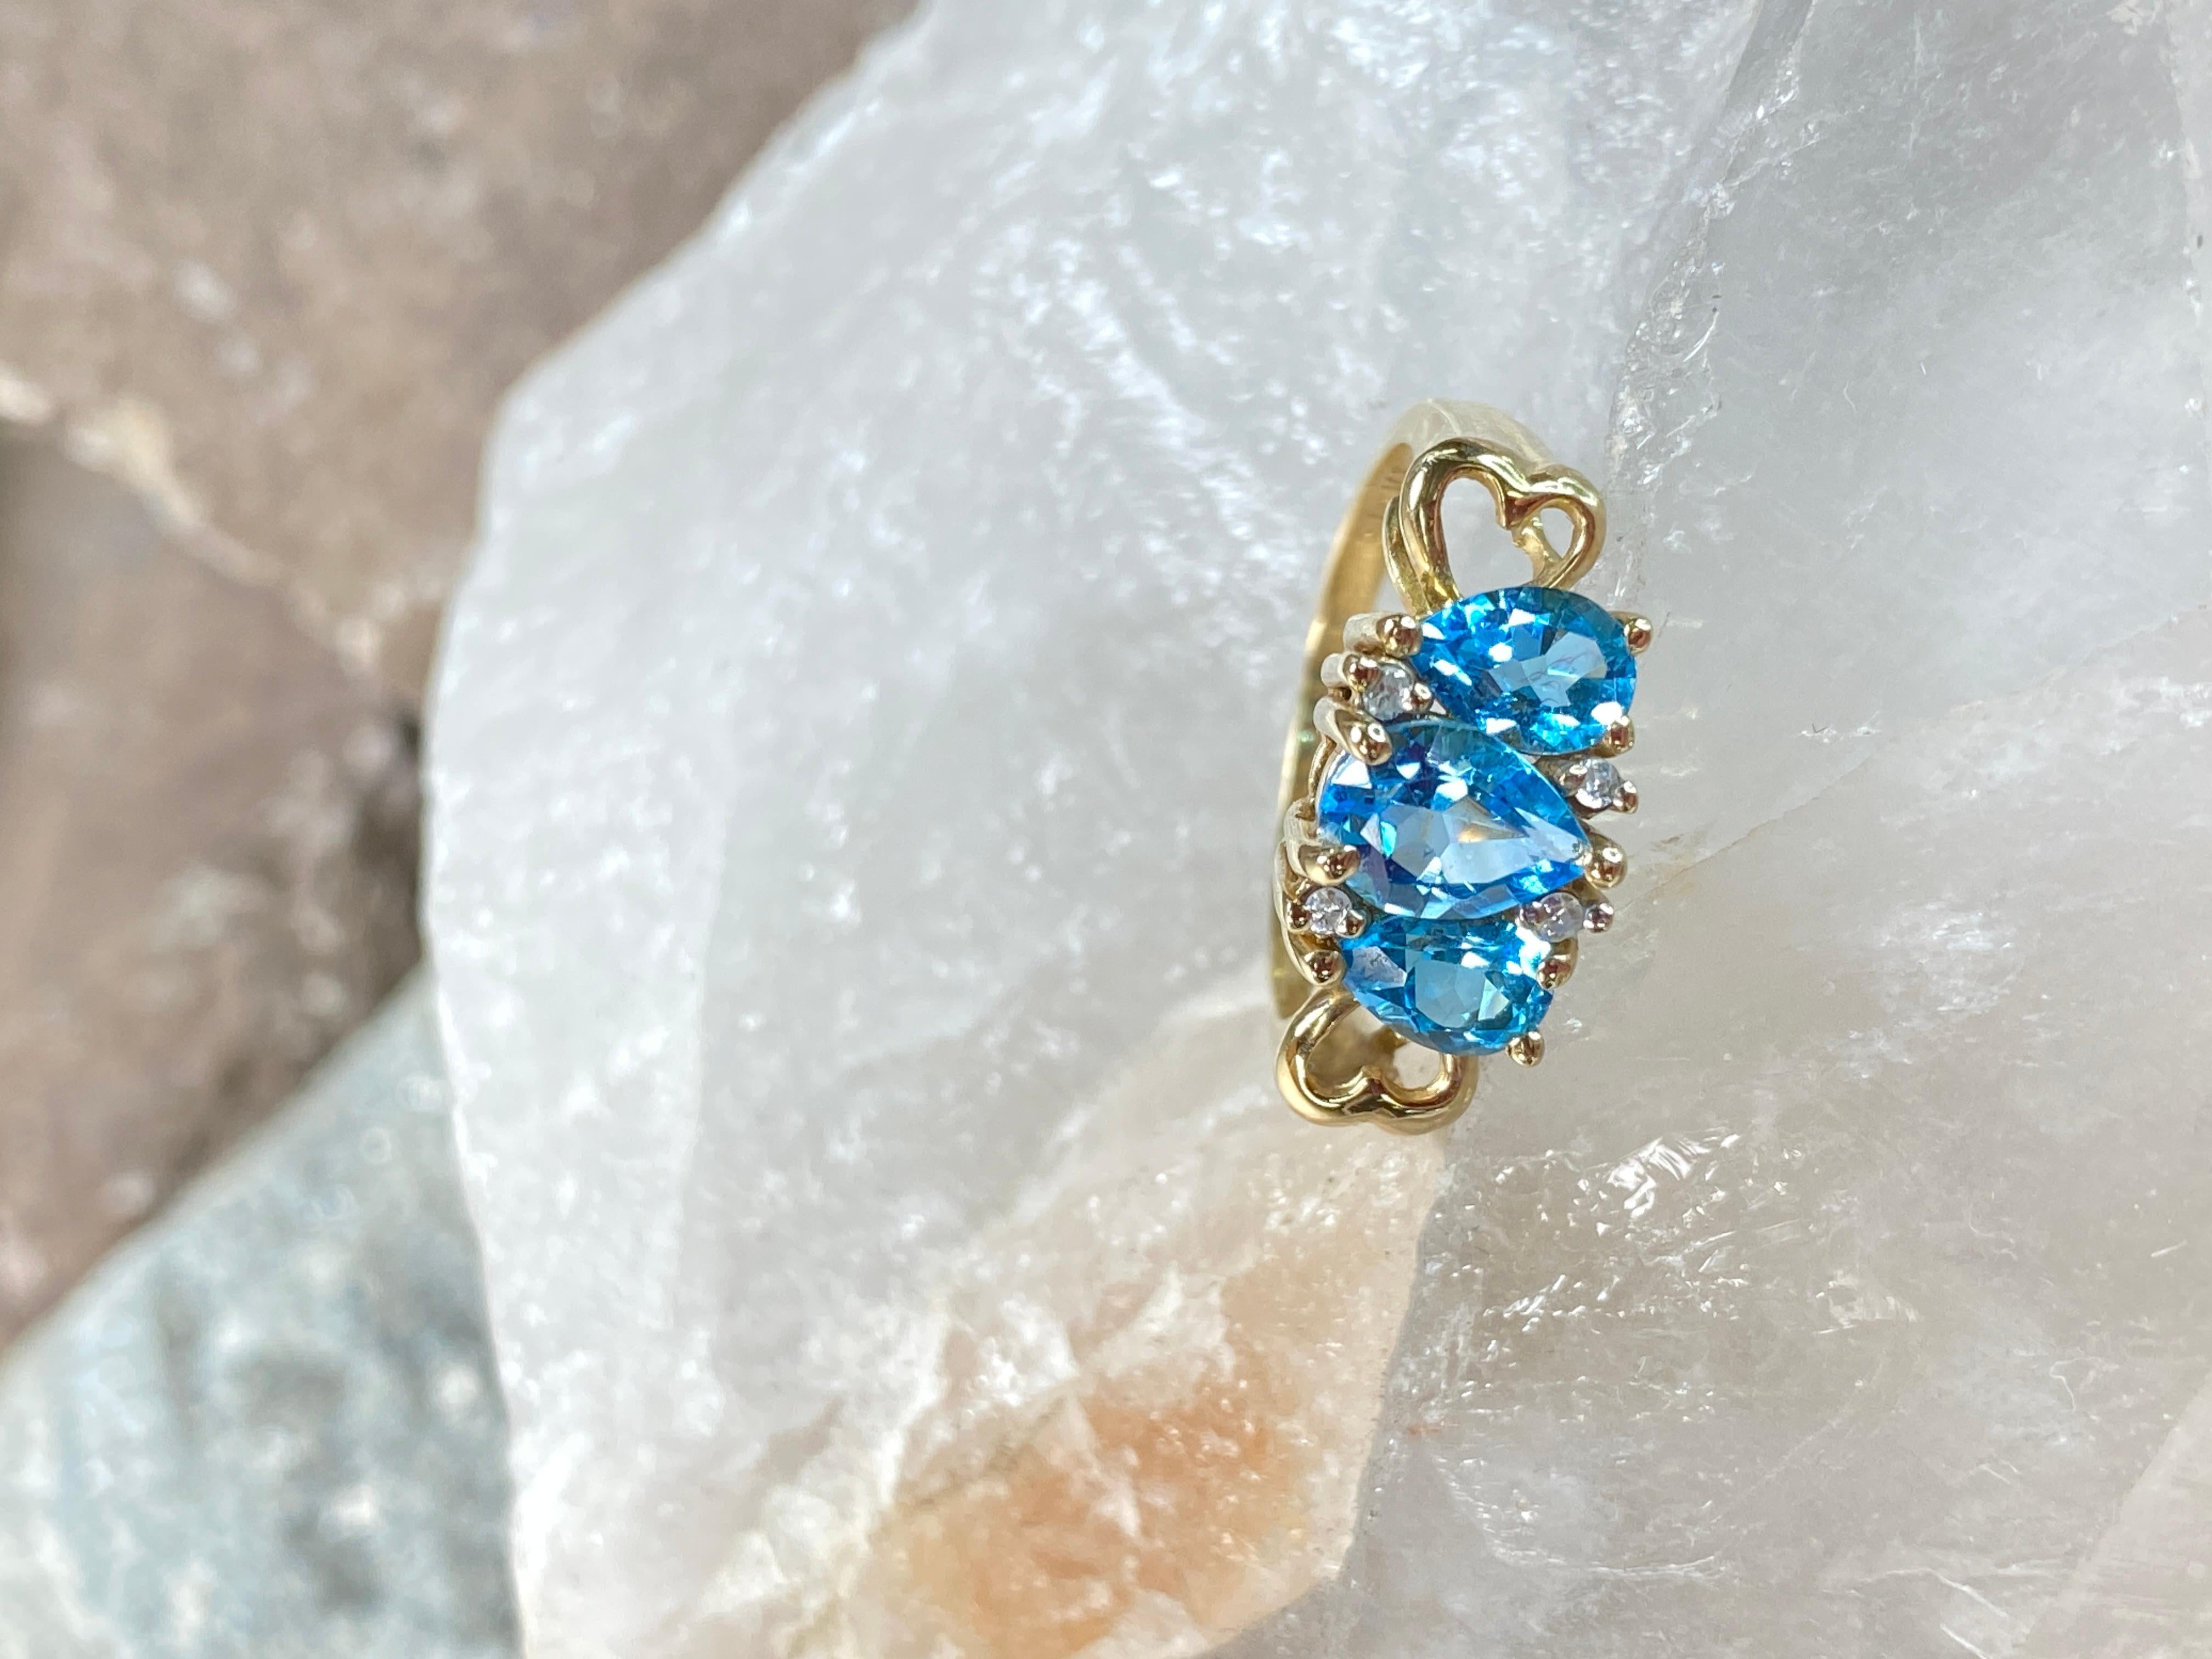 This anniversary ring is a breathtaking testament to enduring love, crafted in lustrous 10K yellow gold. At its center sits a mesmerizing pear-shaped Swiss blue topaz, evoking the serene depths of the ocean with its captivating azure hue. Flanked on